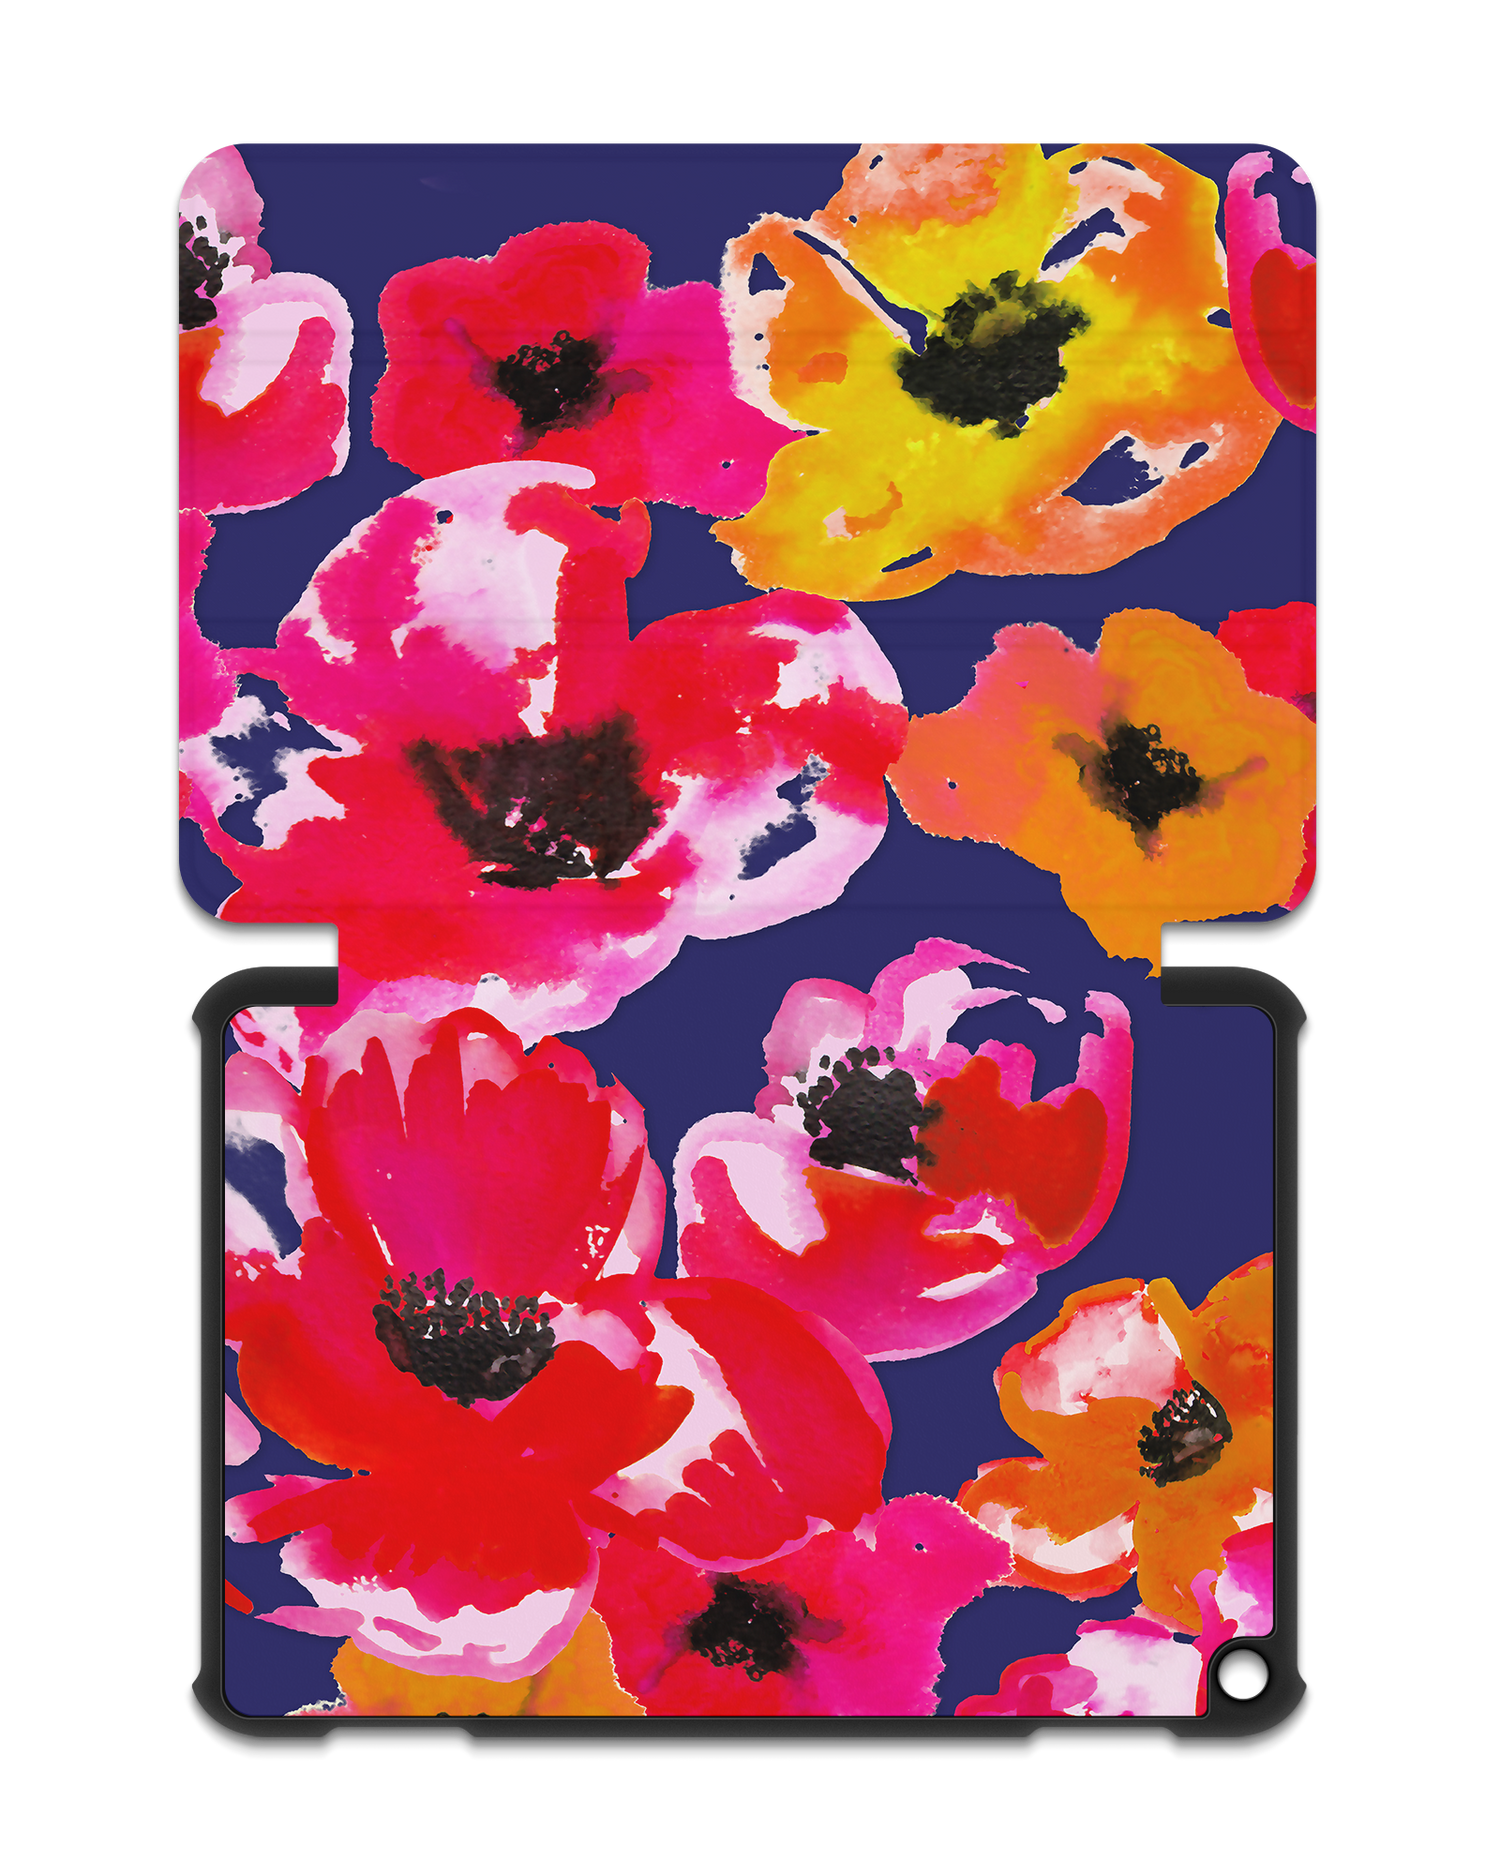 Painted Poppies Tablet Smart Case for Amazon Fire HD 8 (2022), Amazon Fire HD 8 Plus (2022), Amazon Fire HD 8 (2020), Amazon Fire HD 8 Plus (2020): Opened